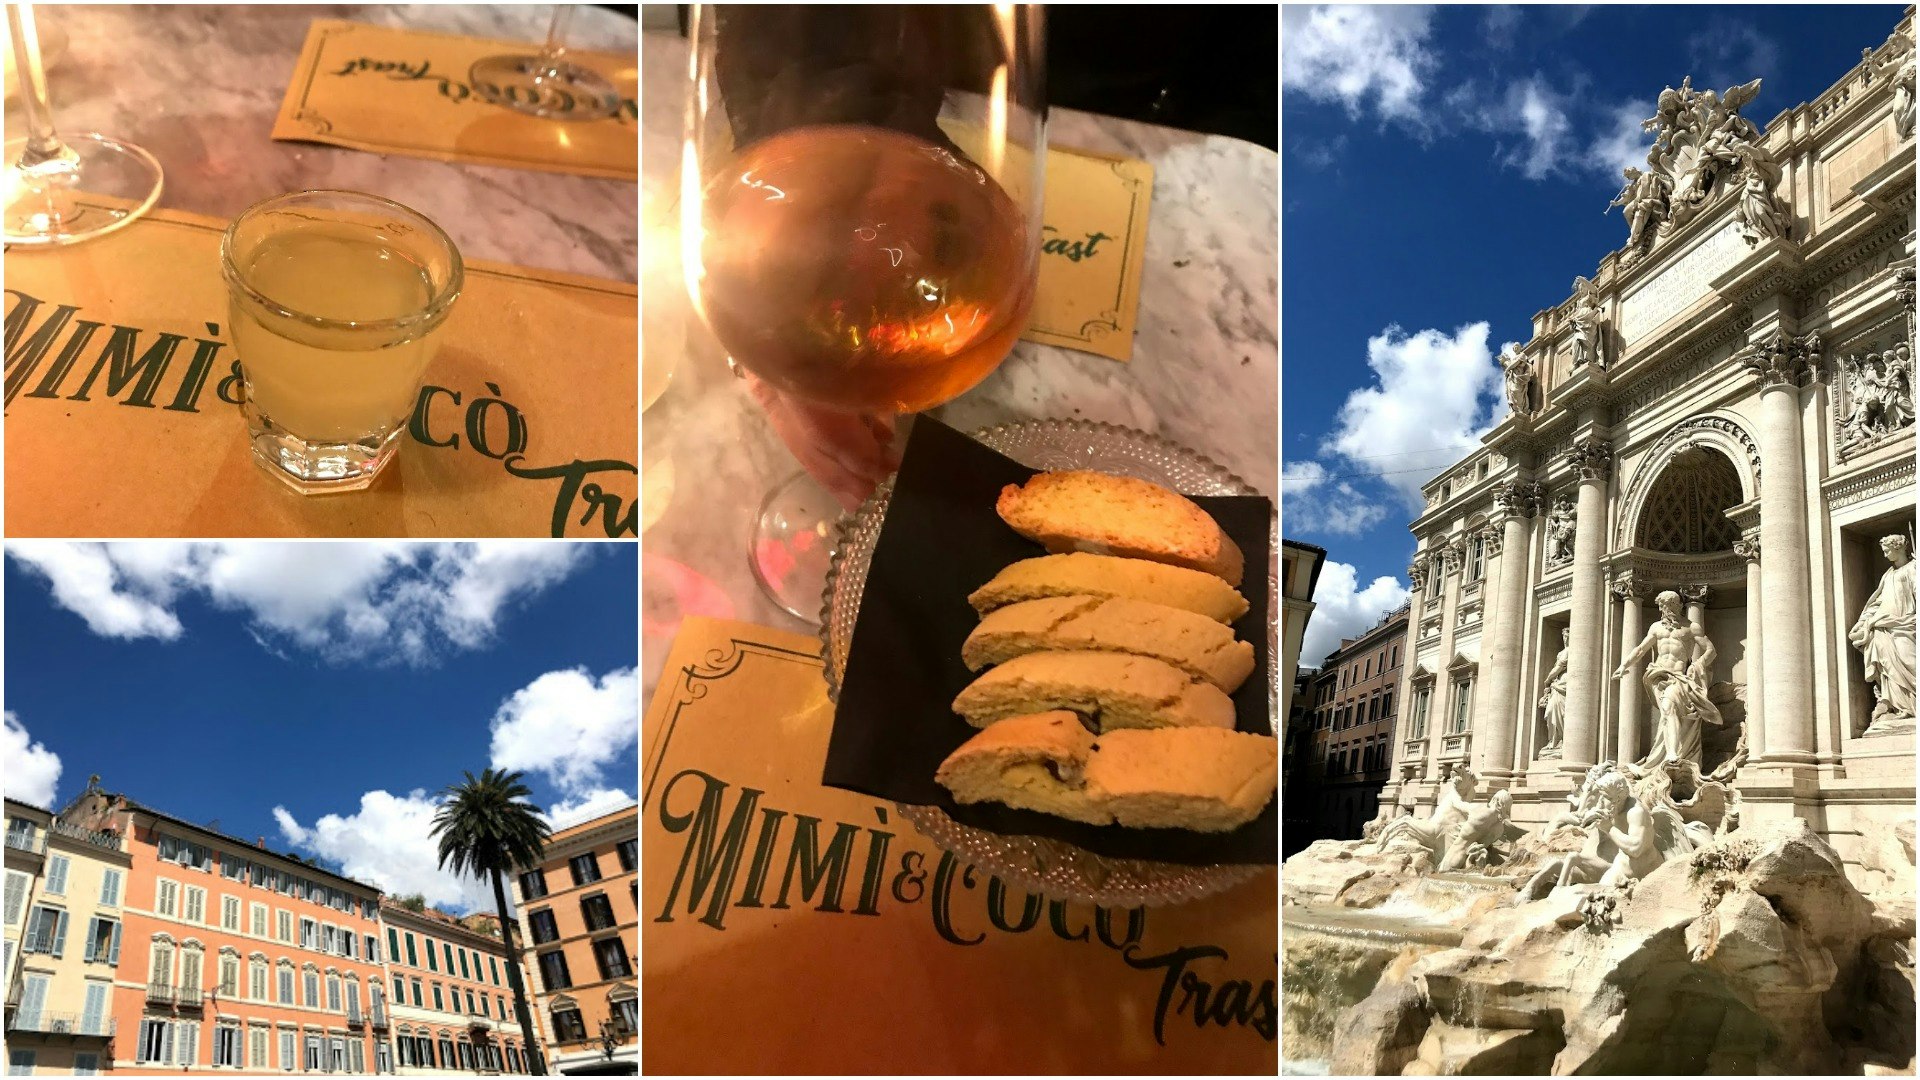 Rome budget - A collaged image of a class of prosecco, Roman buildings, and a close up of bread and wine